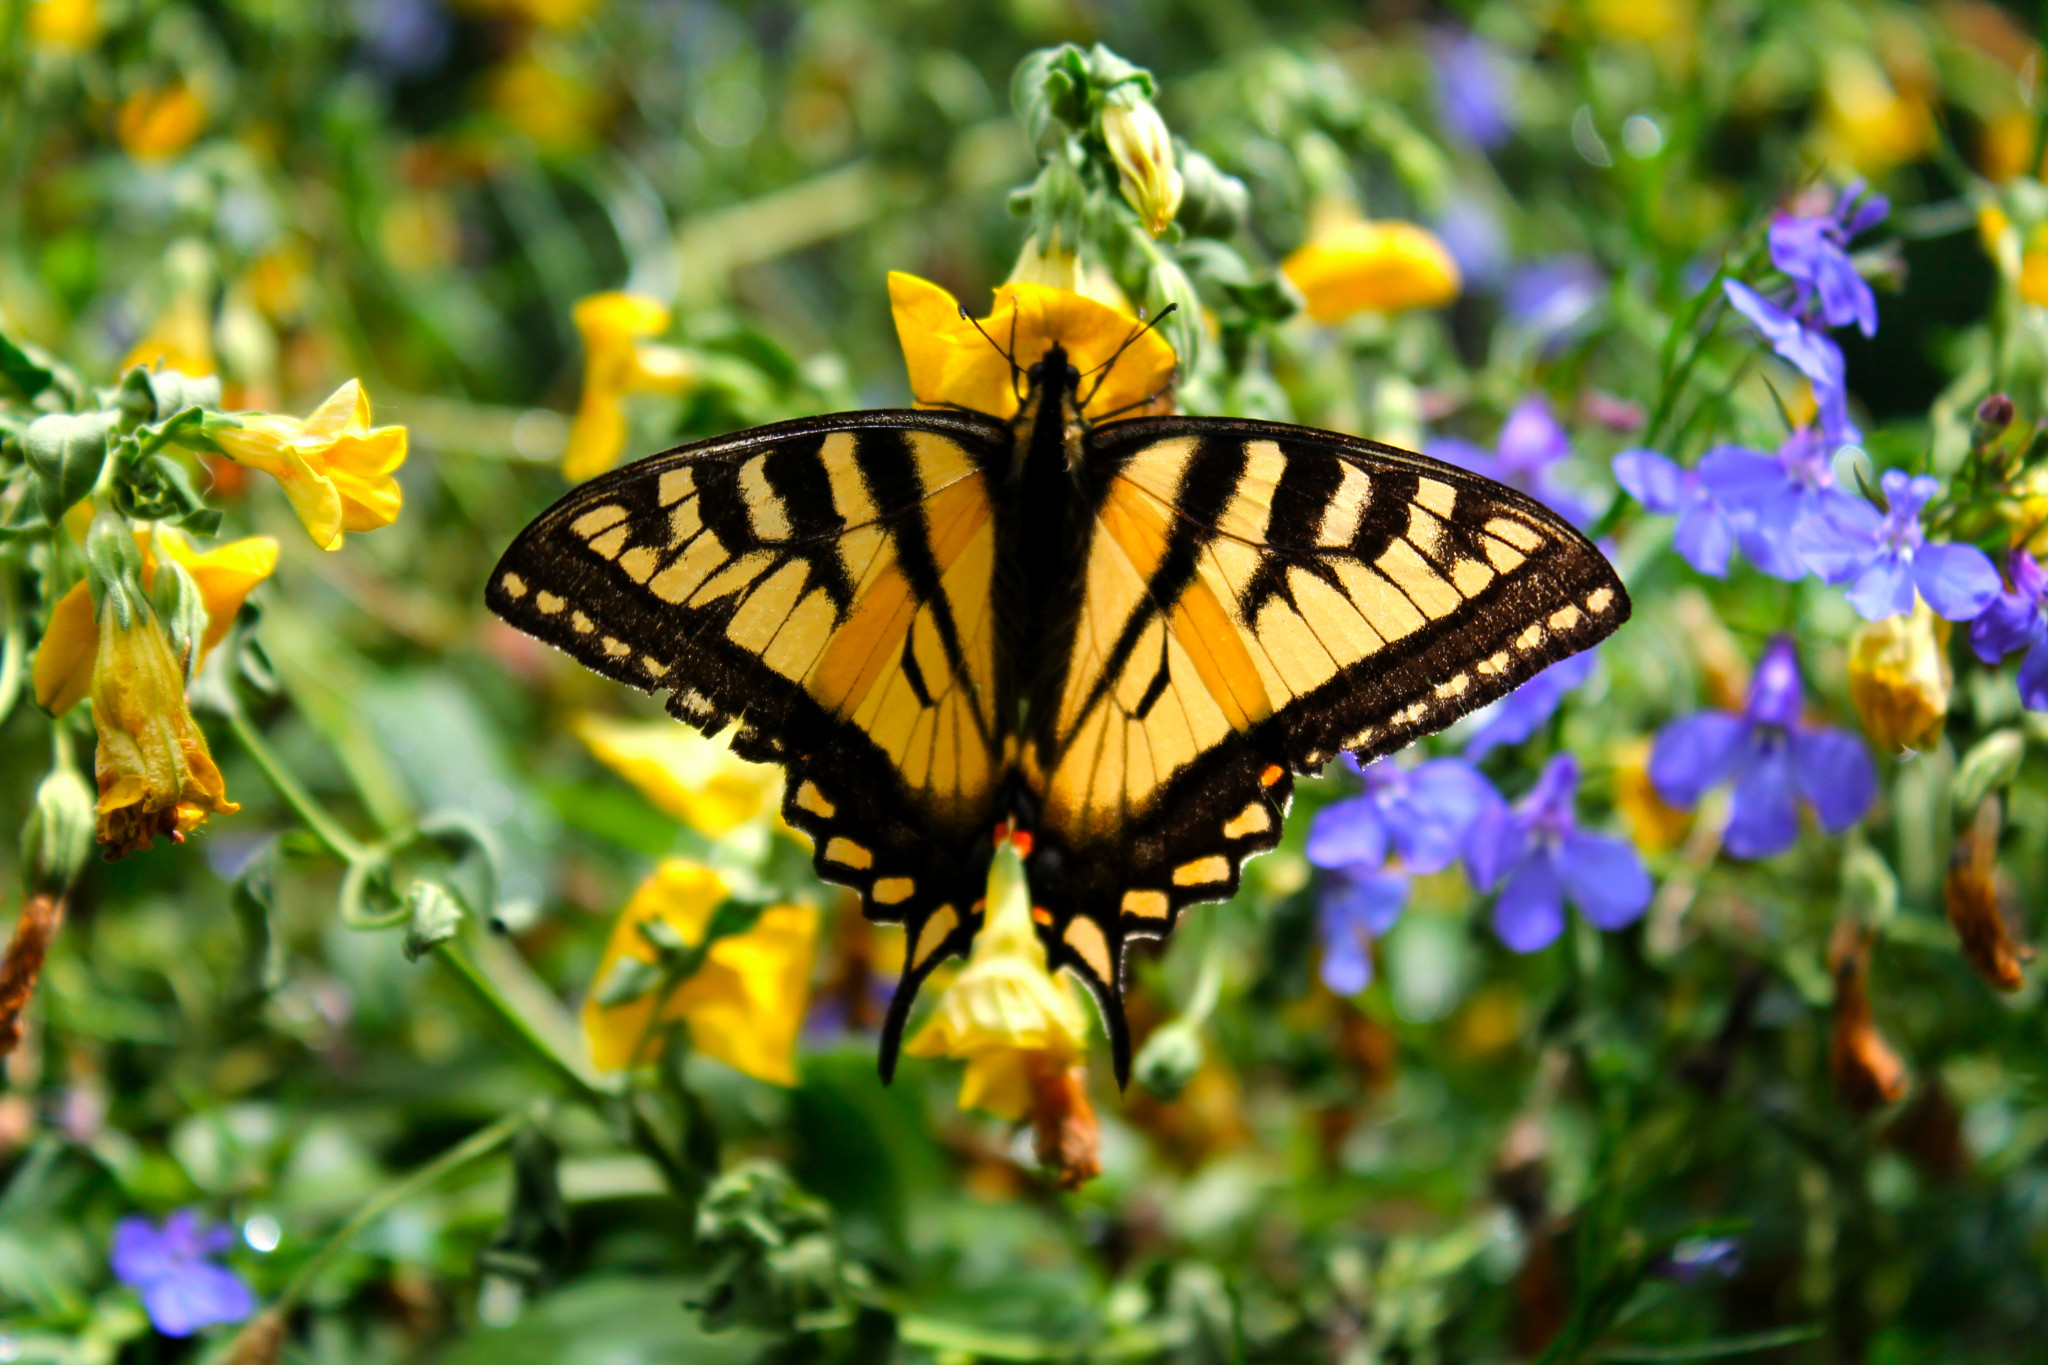 A Tiger Swallowtail butterfly pollinating colorful yellow and purple Vermont wildflowers